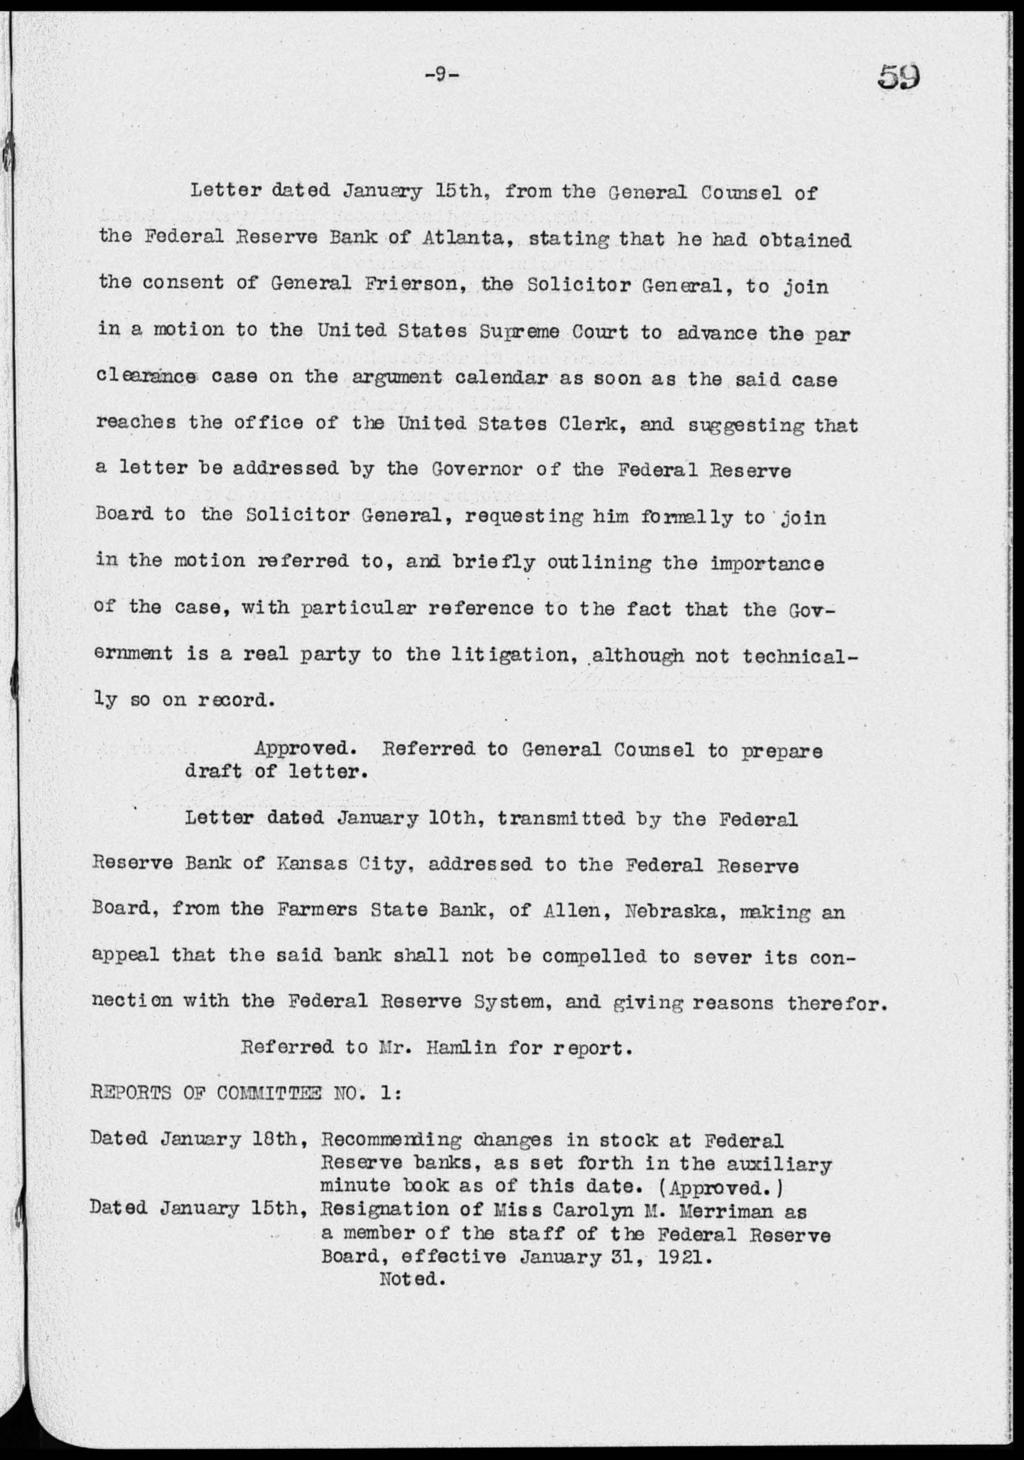 Letter dated January 15th, from the General Counsel of the Federal Reserve Bank of Atlanta, stating that he had obtained the consent of General Frierson, the Solicitor General, to,ioin in a motion to